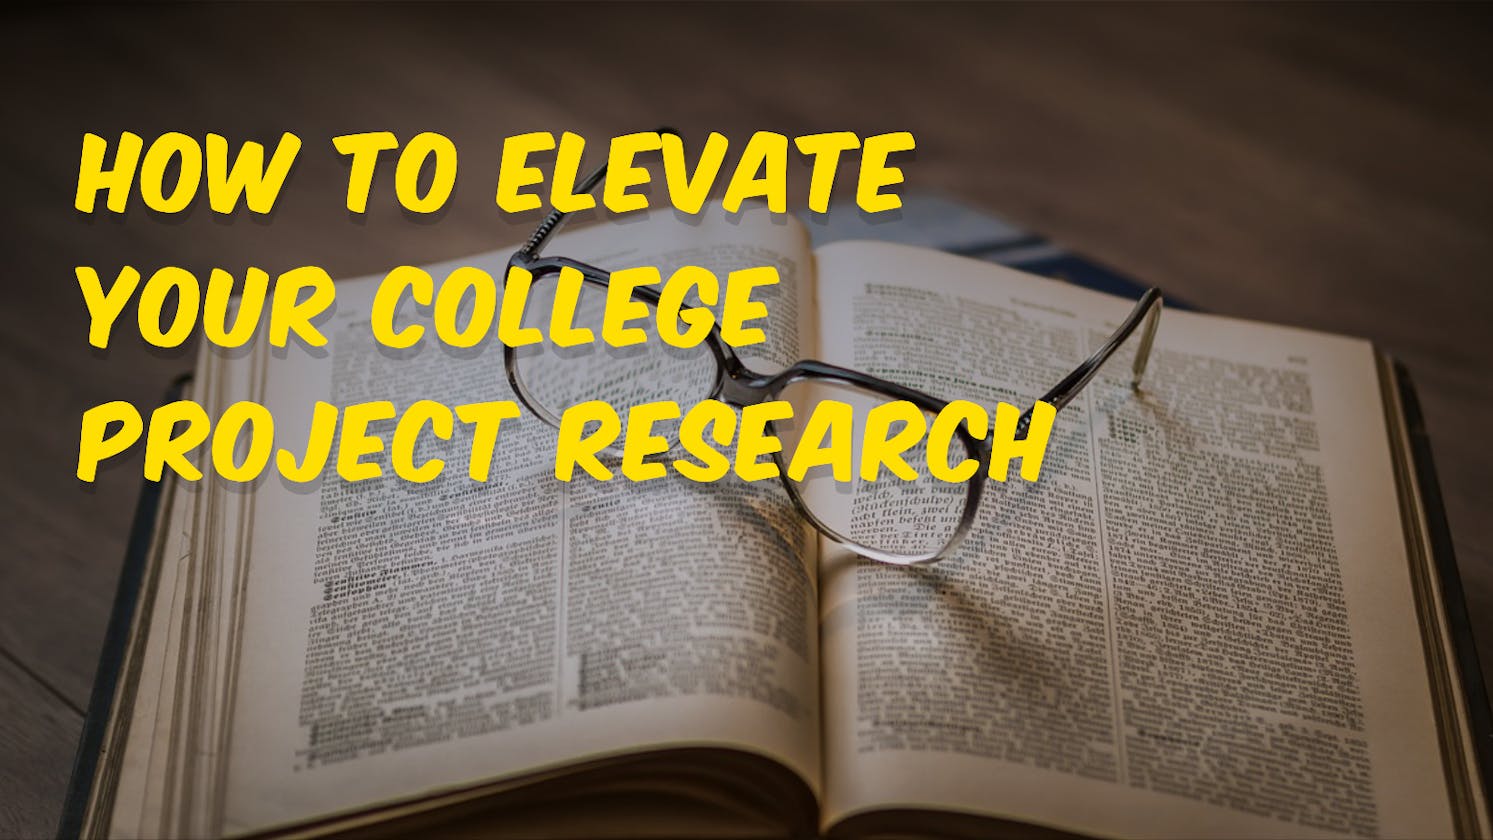 How to Elevate Your College Project Research